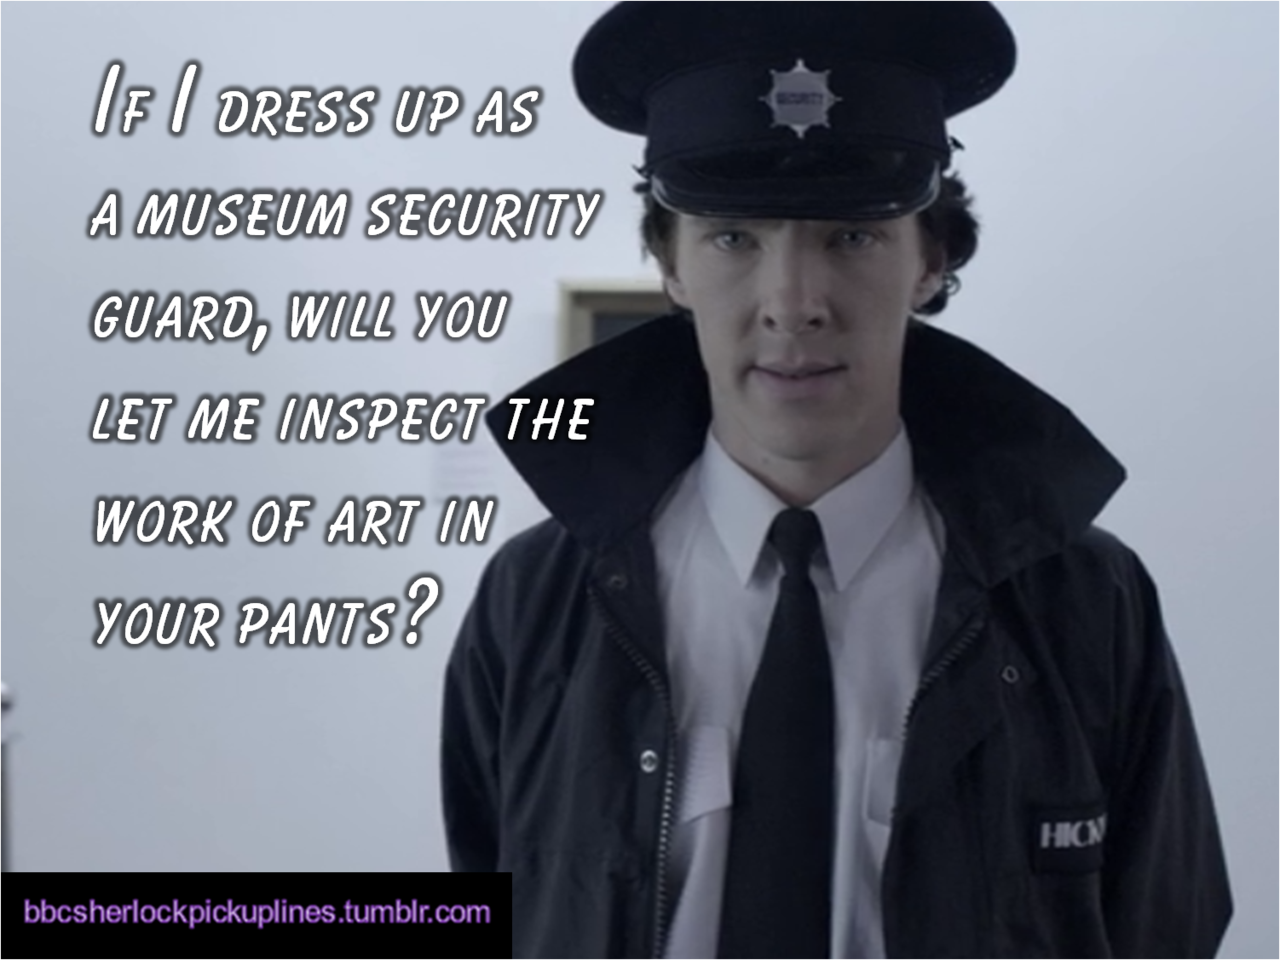 &ldquo;If I dress up as a museum security guard, will you let me inspect the